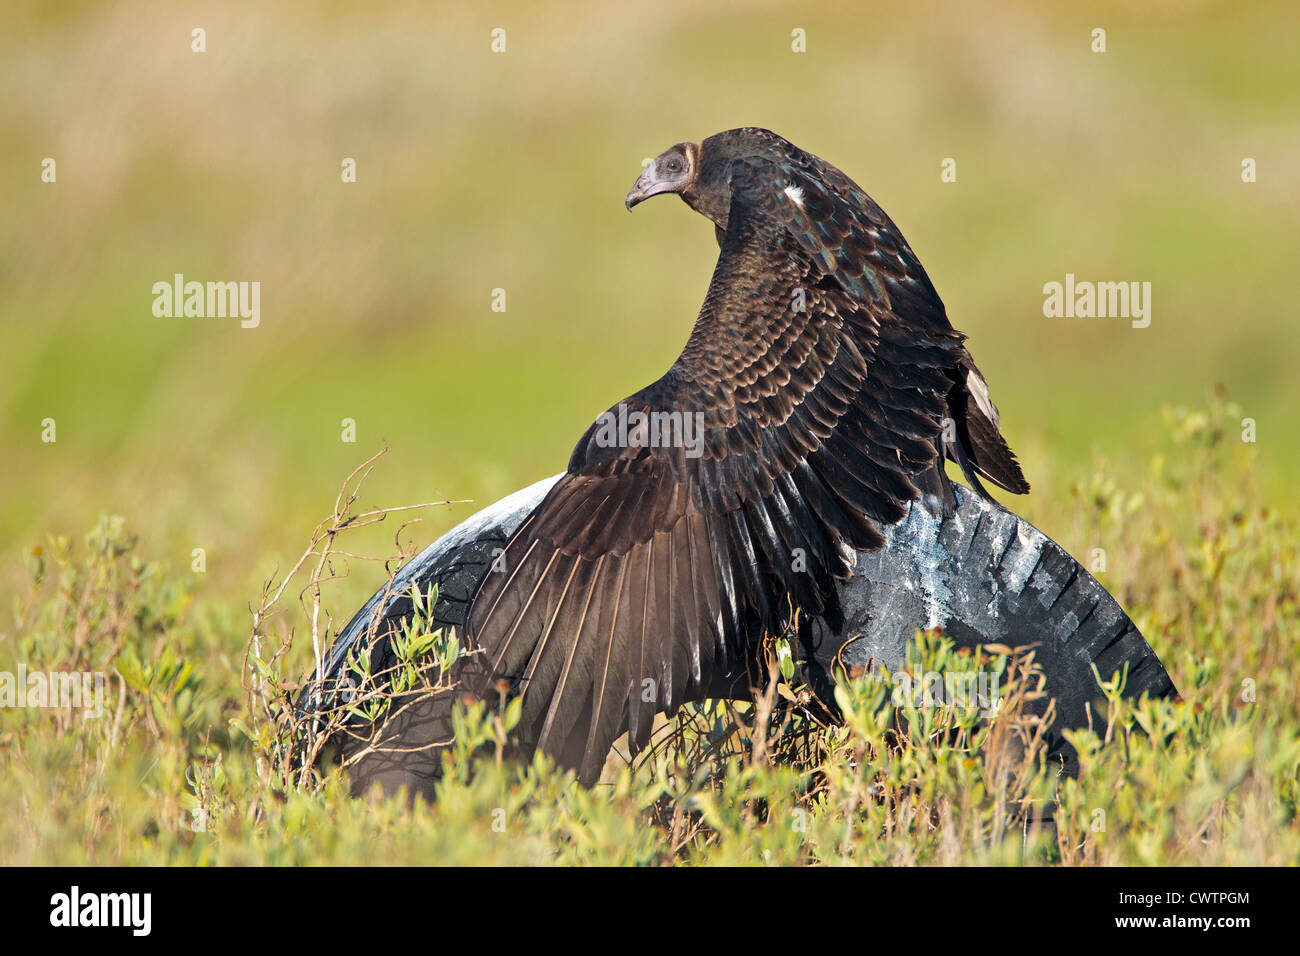 A turkey vulture waiting on an old tire Stock Photo